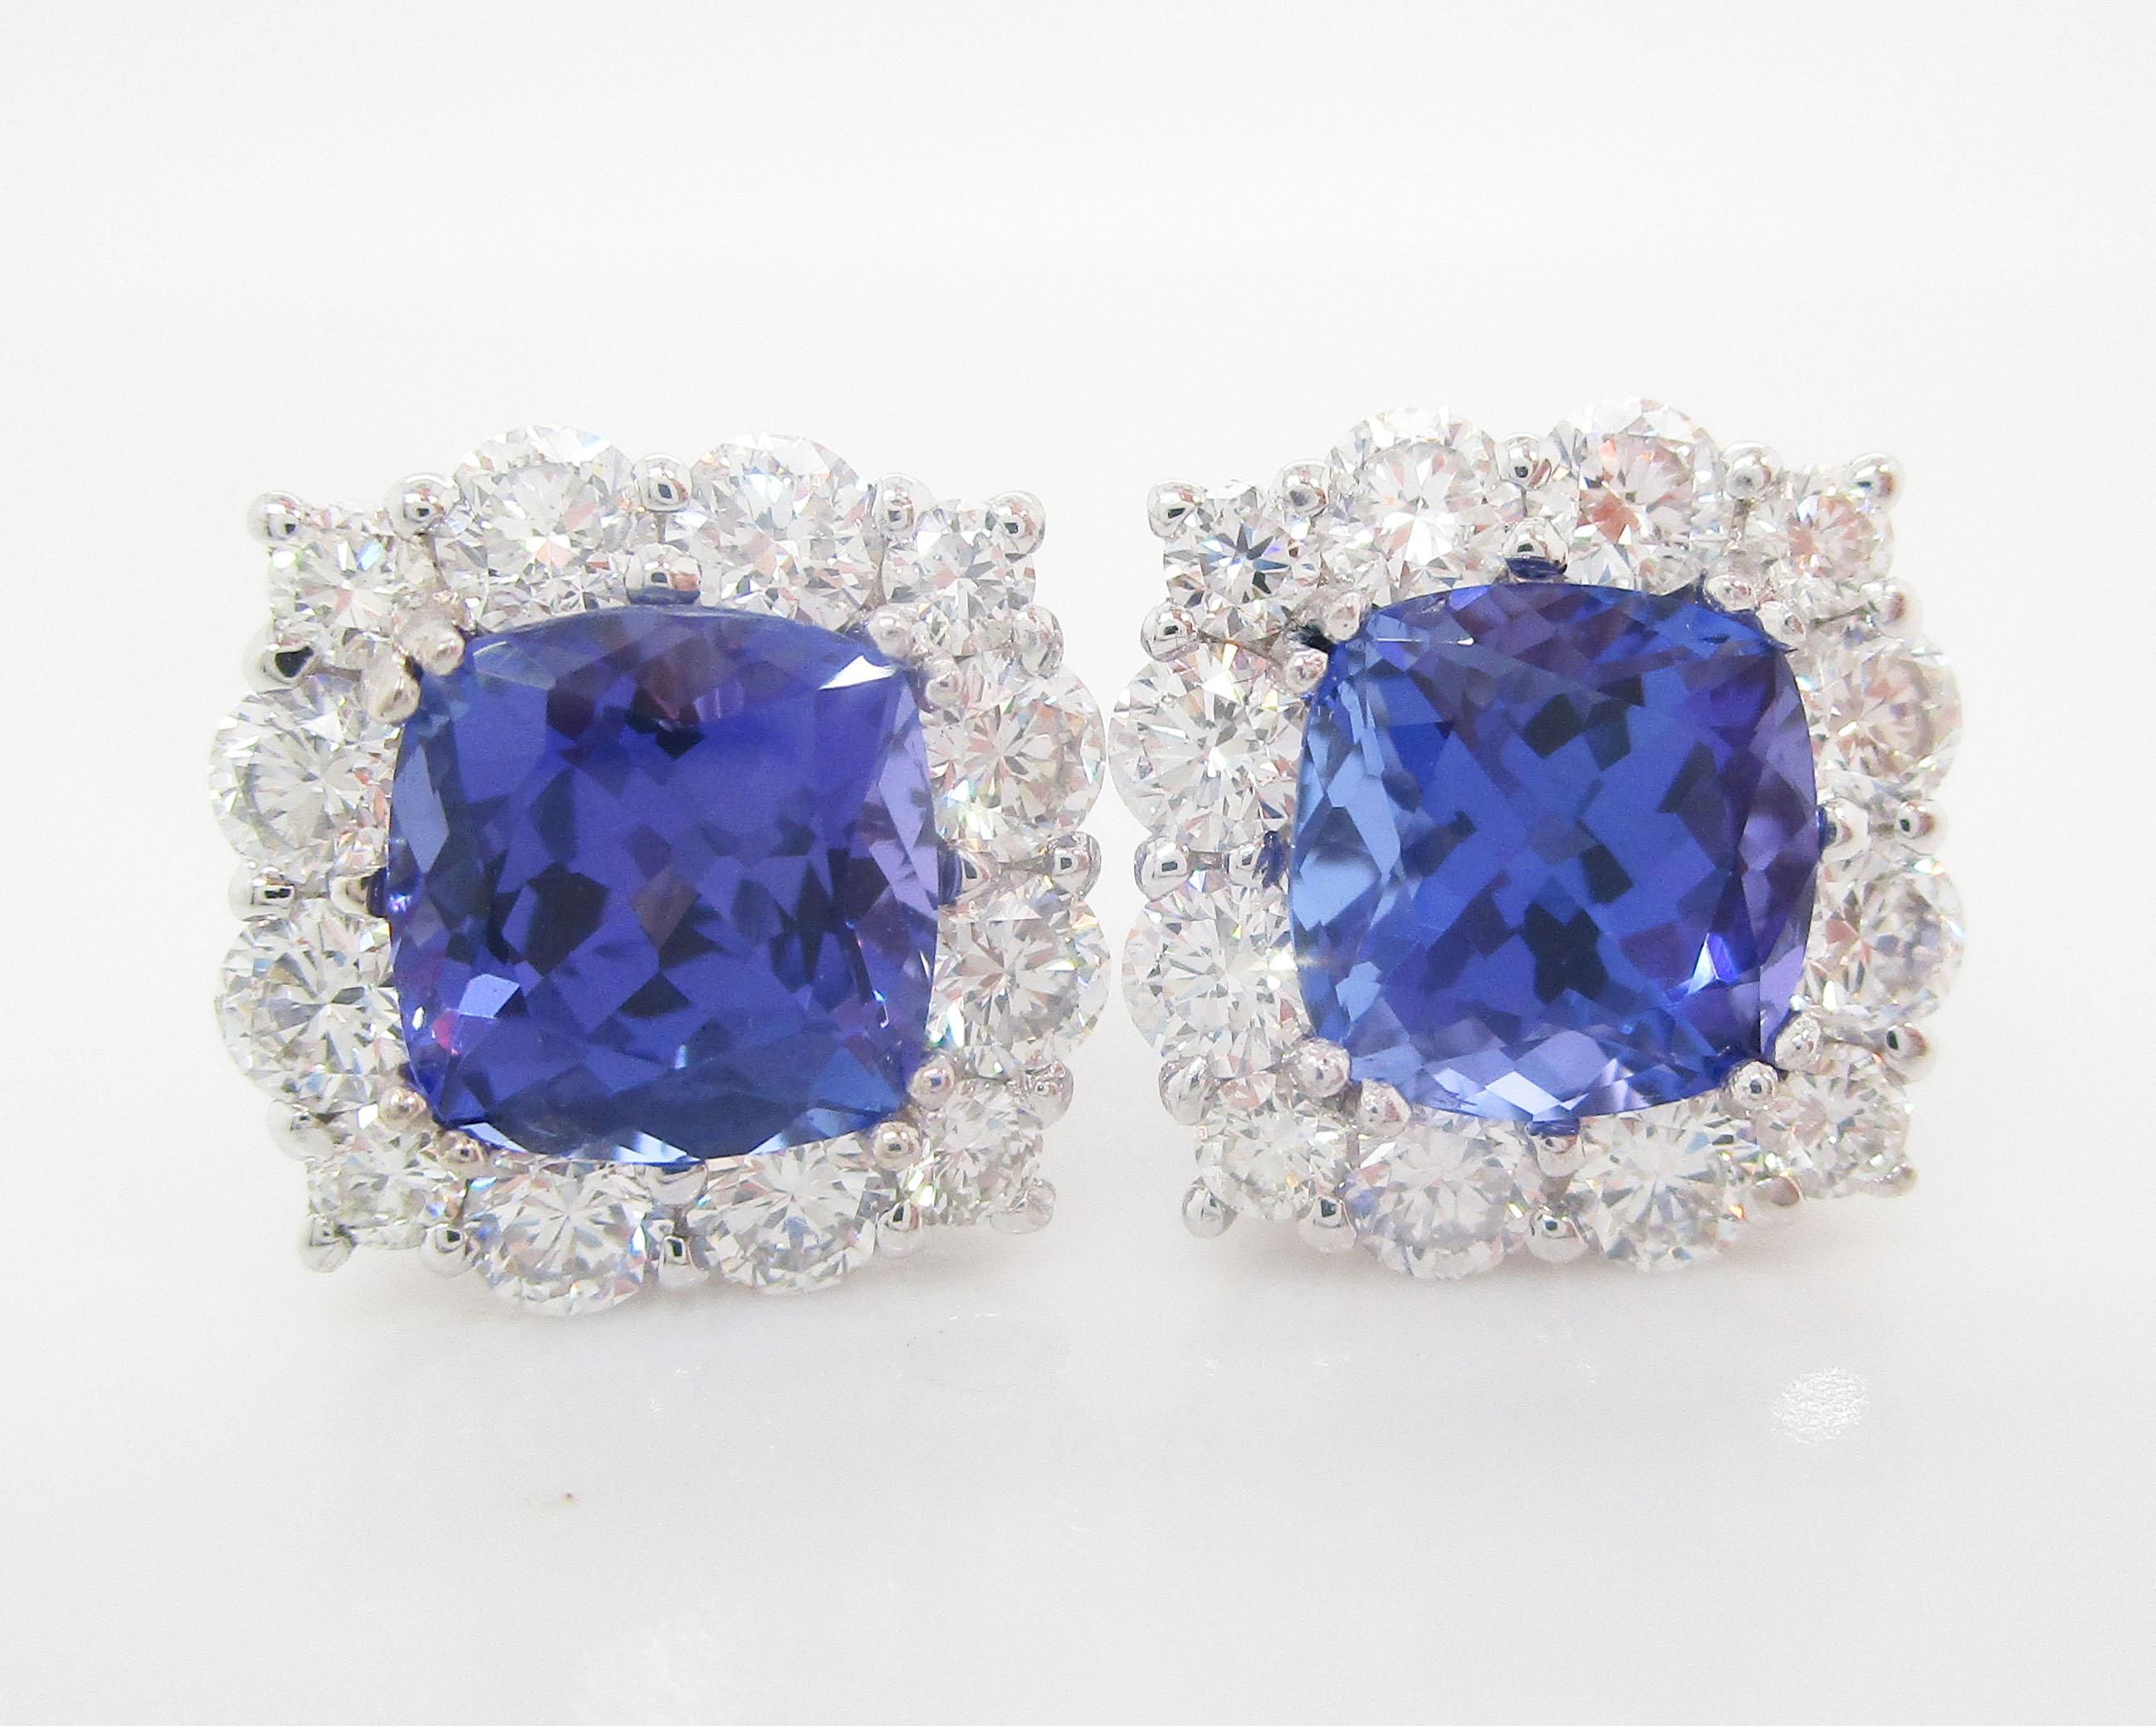 These earrings fill a color spectrum that was unidentified in the 1920s. The colors are showstopping! The stones are extremely well matched and visible from ten tables away. The tanzanites are encircled with G/VS diamonds. These are the perfect